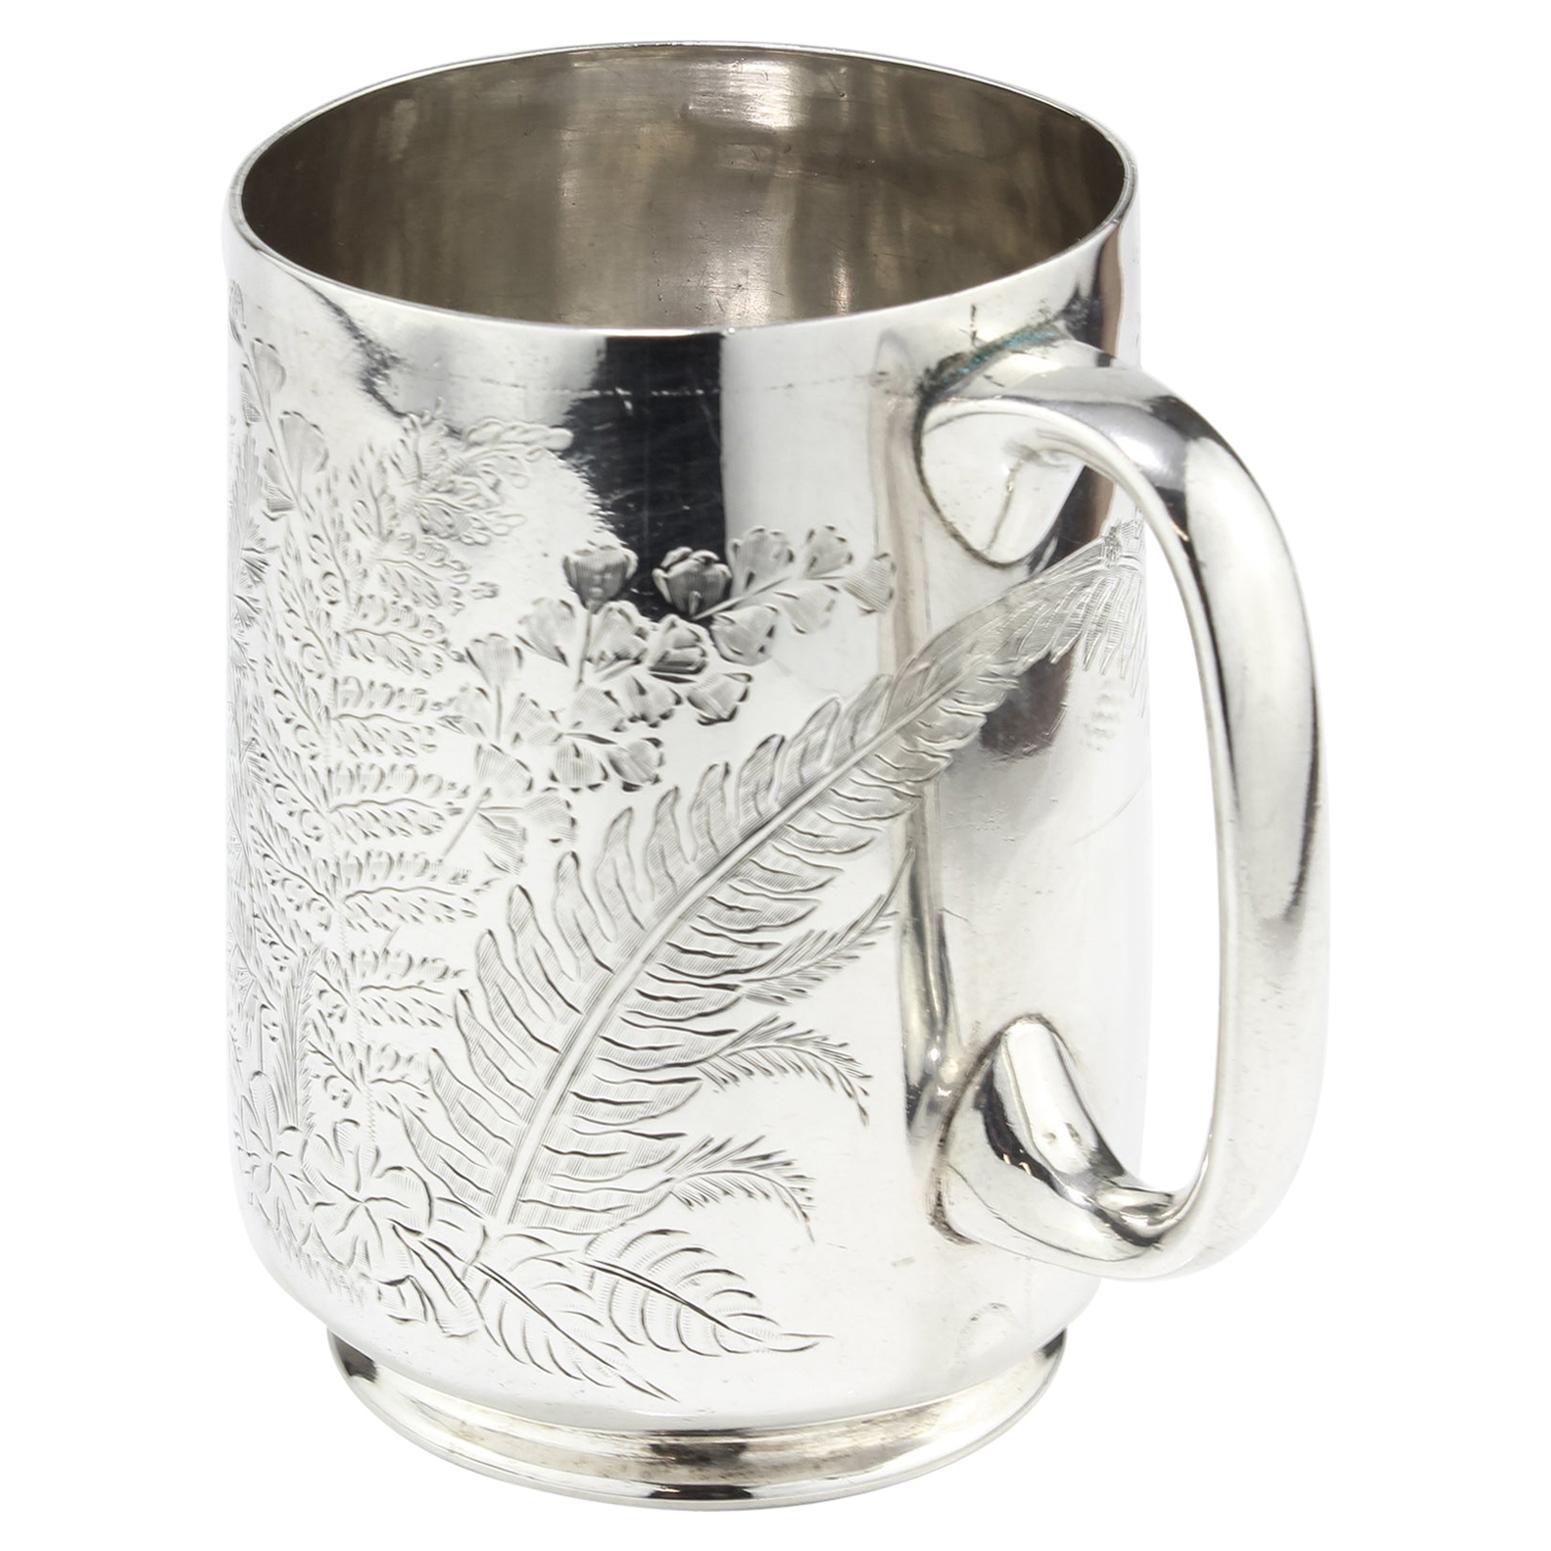 Antique Victorian Small Sterling Silver Mug with Floral & Leaf Engravings, 1884